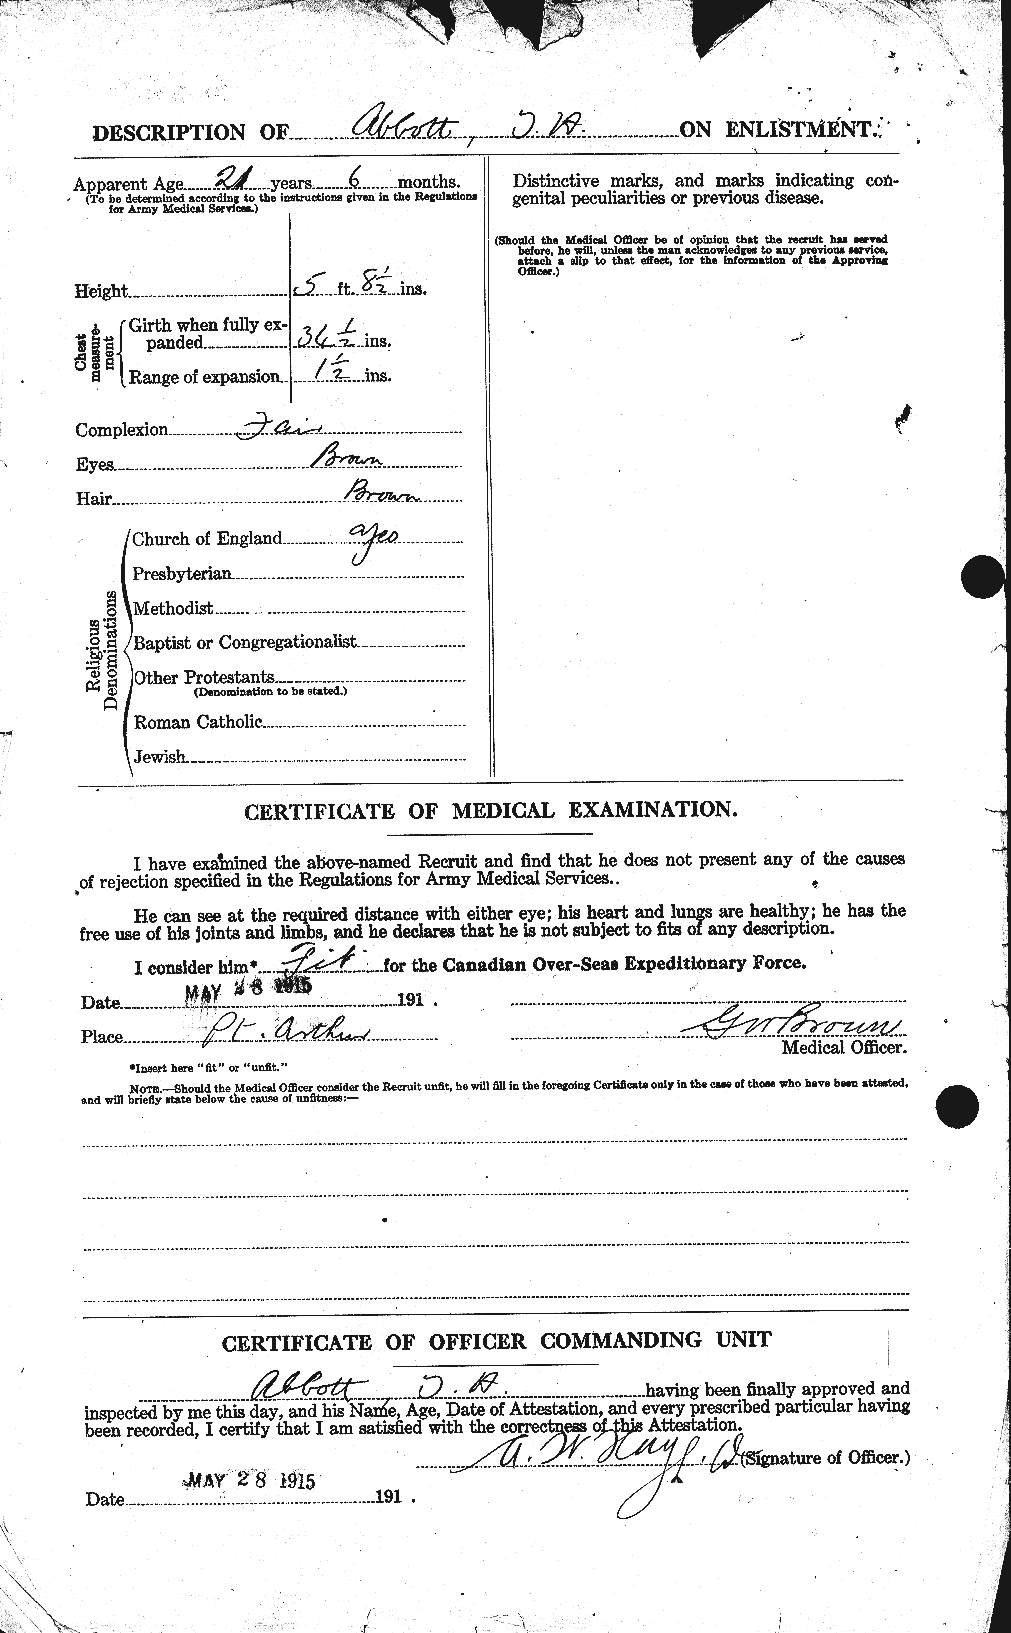 Personnel Records of the First World War - CEF 201100b